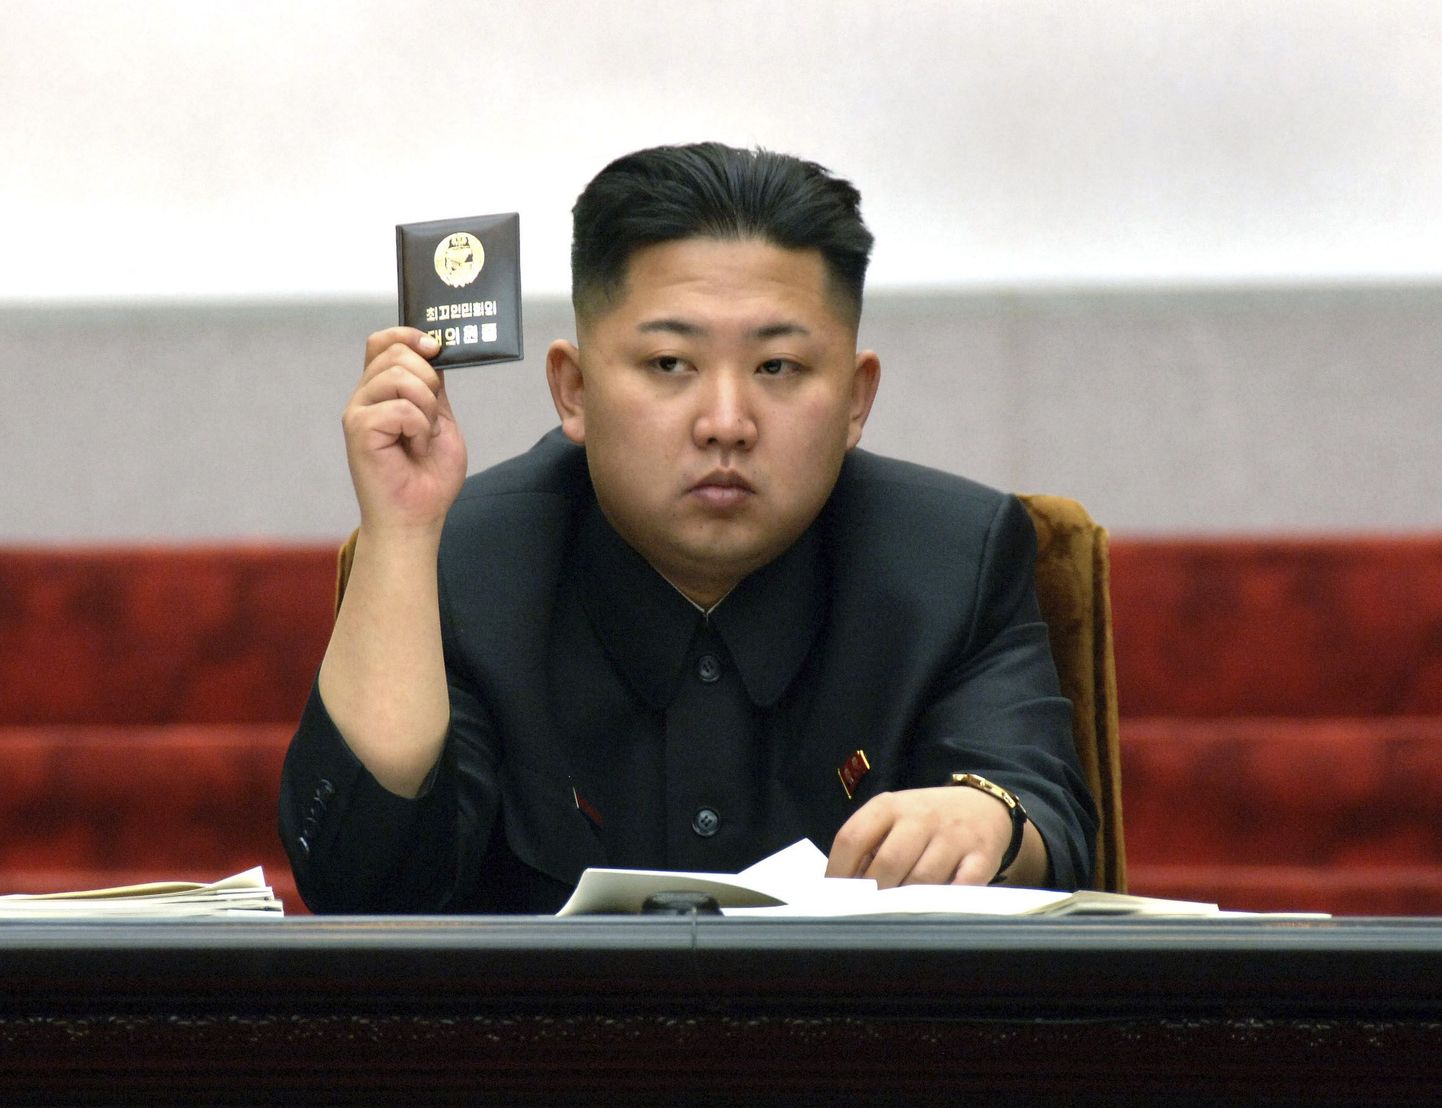 North Korean leader Kim Jong-Un holds up his ballot during the fifth session of the 12th Supreme People's Assembly of North Korea at the Mansudae Assembly Hall in Pyongyang in this April 13, 2012 file photo released by the North's KCNA on April 14, 2012. Kim is suffering from "discomfort", state media has said in the first official acknowledgement of ill health after a prolonged period out of the public eye. Kim, 31, who is frequently the centrepiece of the isolated country's propaganda, has not been photographed by state media since appearing at a concert alongside his wife on September 3, fuelling speculation he is suffering from bad health. REUTERS/KCNA (NORTH KOREA - Tags: POLITICS TPX IMAGES OF THE DAY) 

QUALITY FROM SOURCE. THIS IMAGE HAS BEEN SUPPLIED BY A THIRD PARTY. IT IS DISTRIBUTED, EXACTLY AS RECEIVED BY REUTERS, AS A SERVICE TO CLIENTS. NO THIRD PARTY SALES. NOT FOR USE BY REUTERS THIRD PARTY DISTRIBUTORS - RTR30PN7